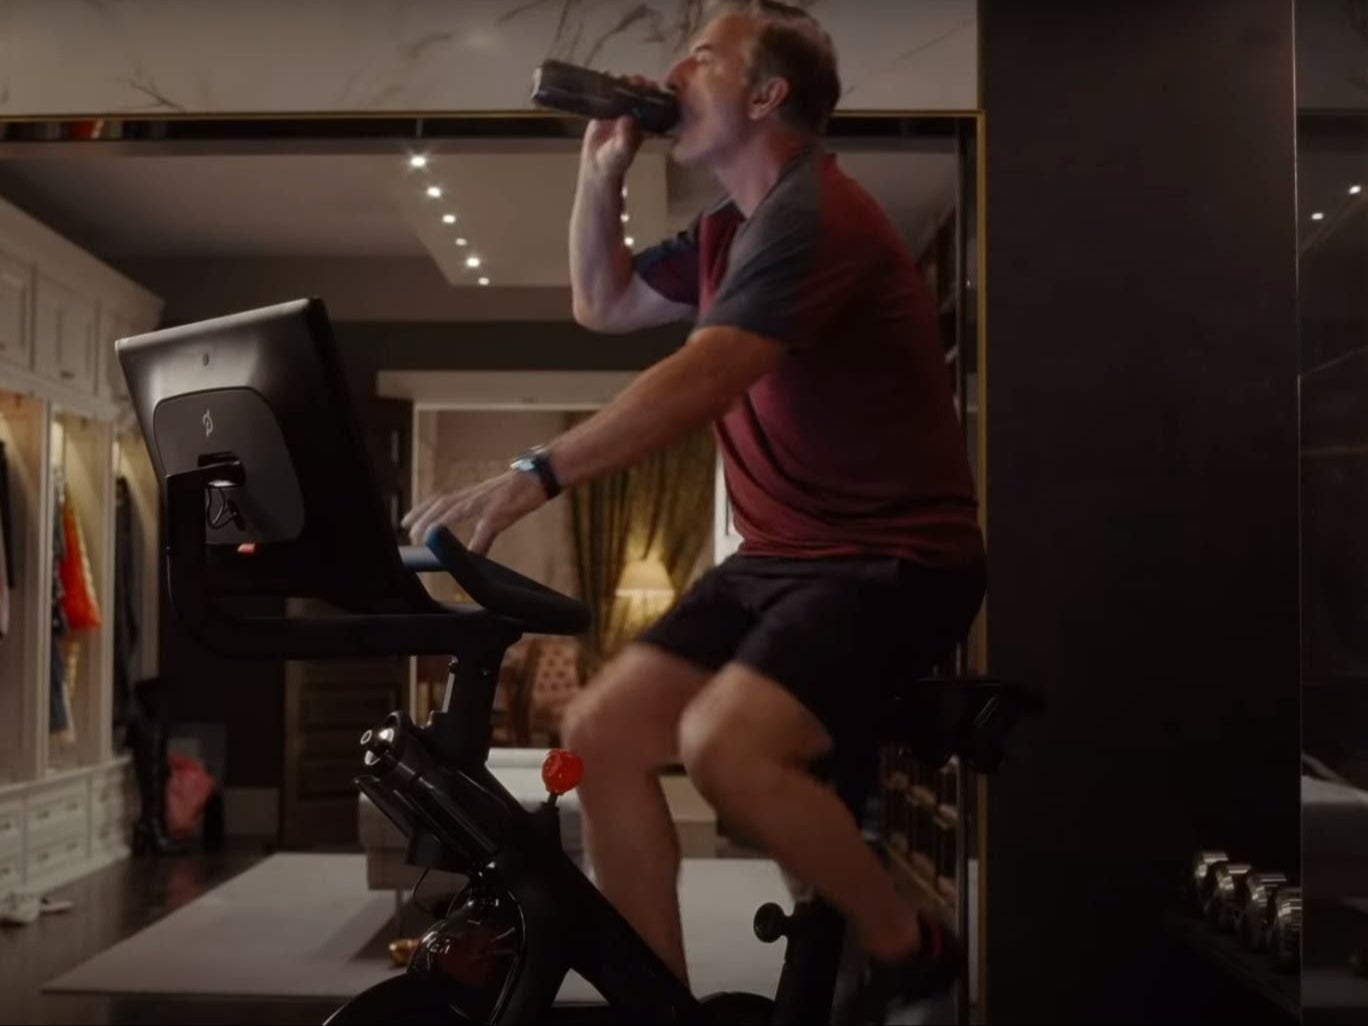 Chris Noth, who plays Mr Big, rides a Peloton before character’s death in ‘And Just Like That’